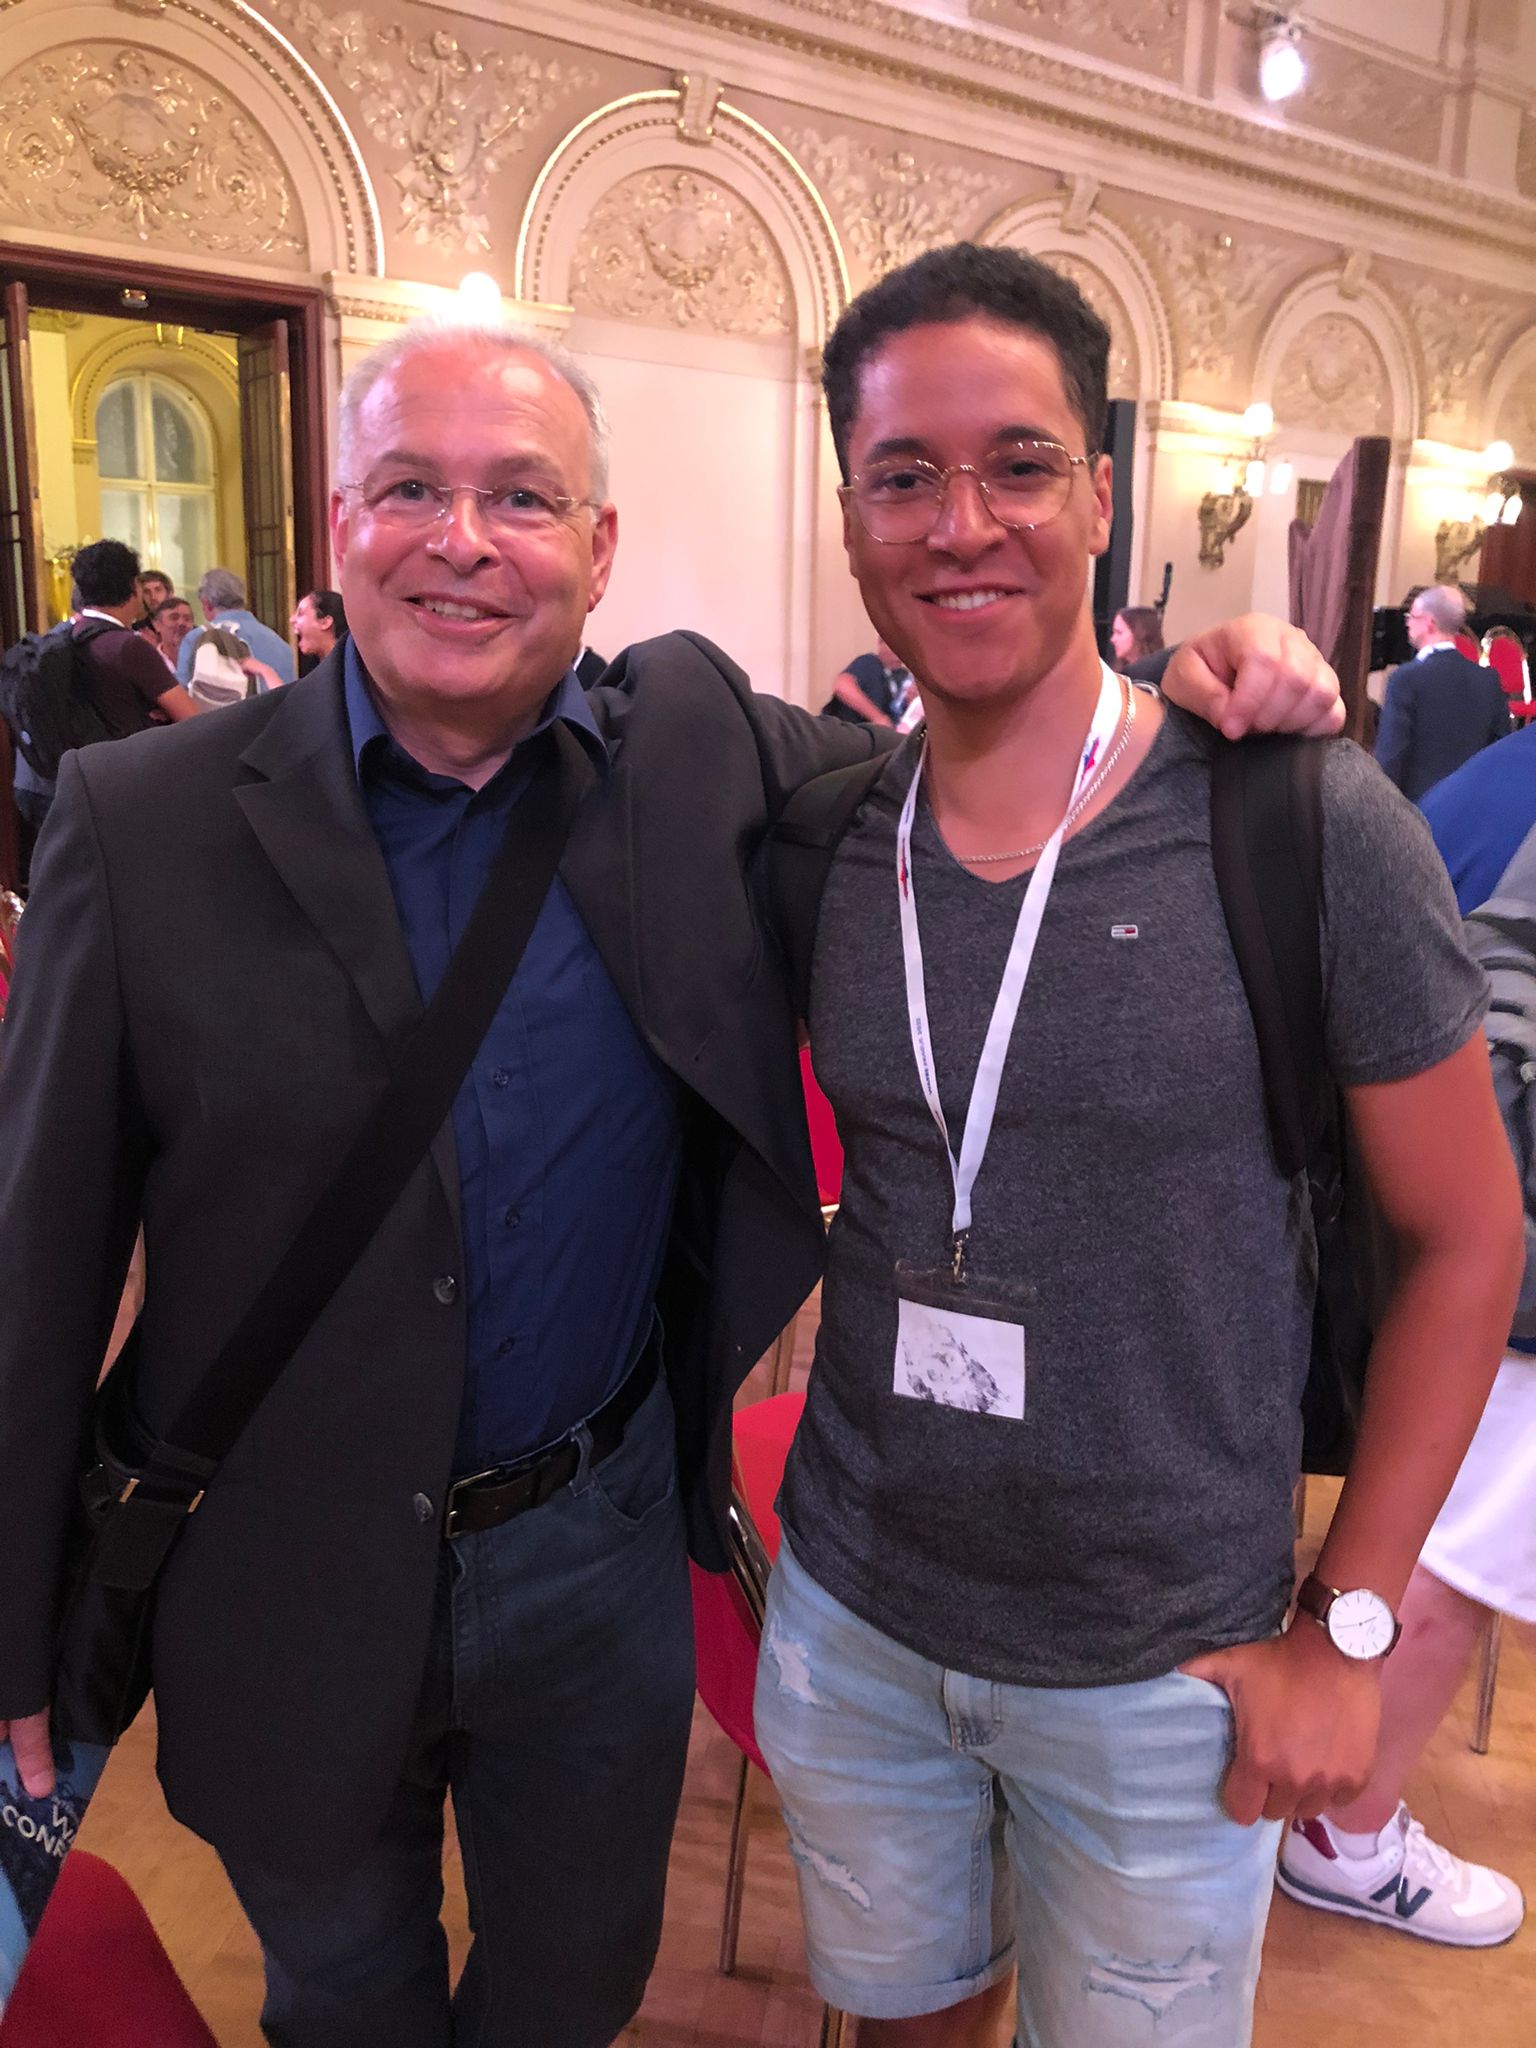 Franco Cesarini & Gauthier Dupertuis at the WASBE Conference in Prague (Czech Republic), 19th-23rd July, 2022